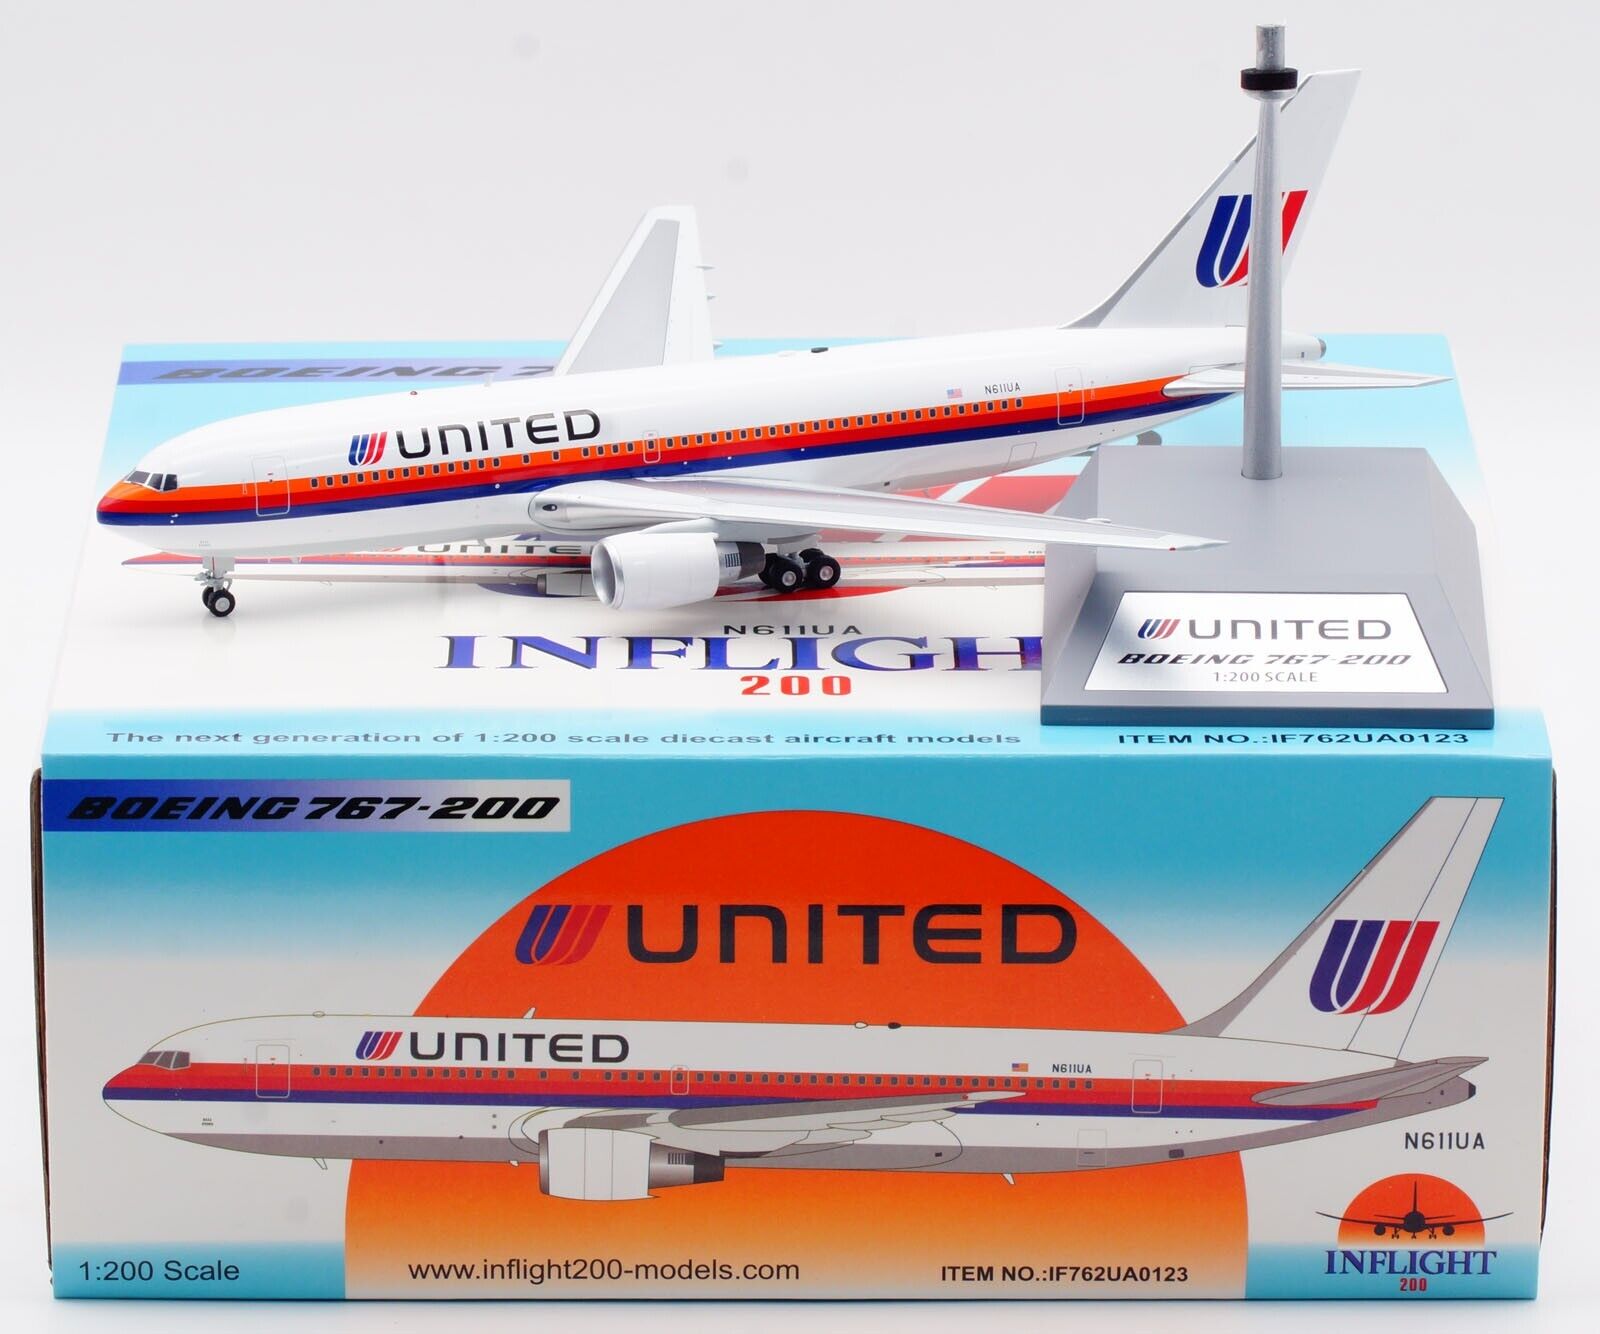 INFLIGHT 1:200 United Airlines Boeing B767-200 Diecast Aircraft Jet Model N611UA